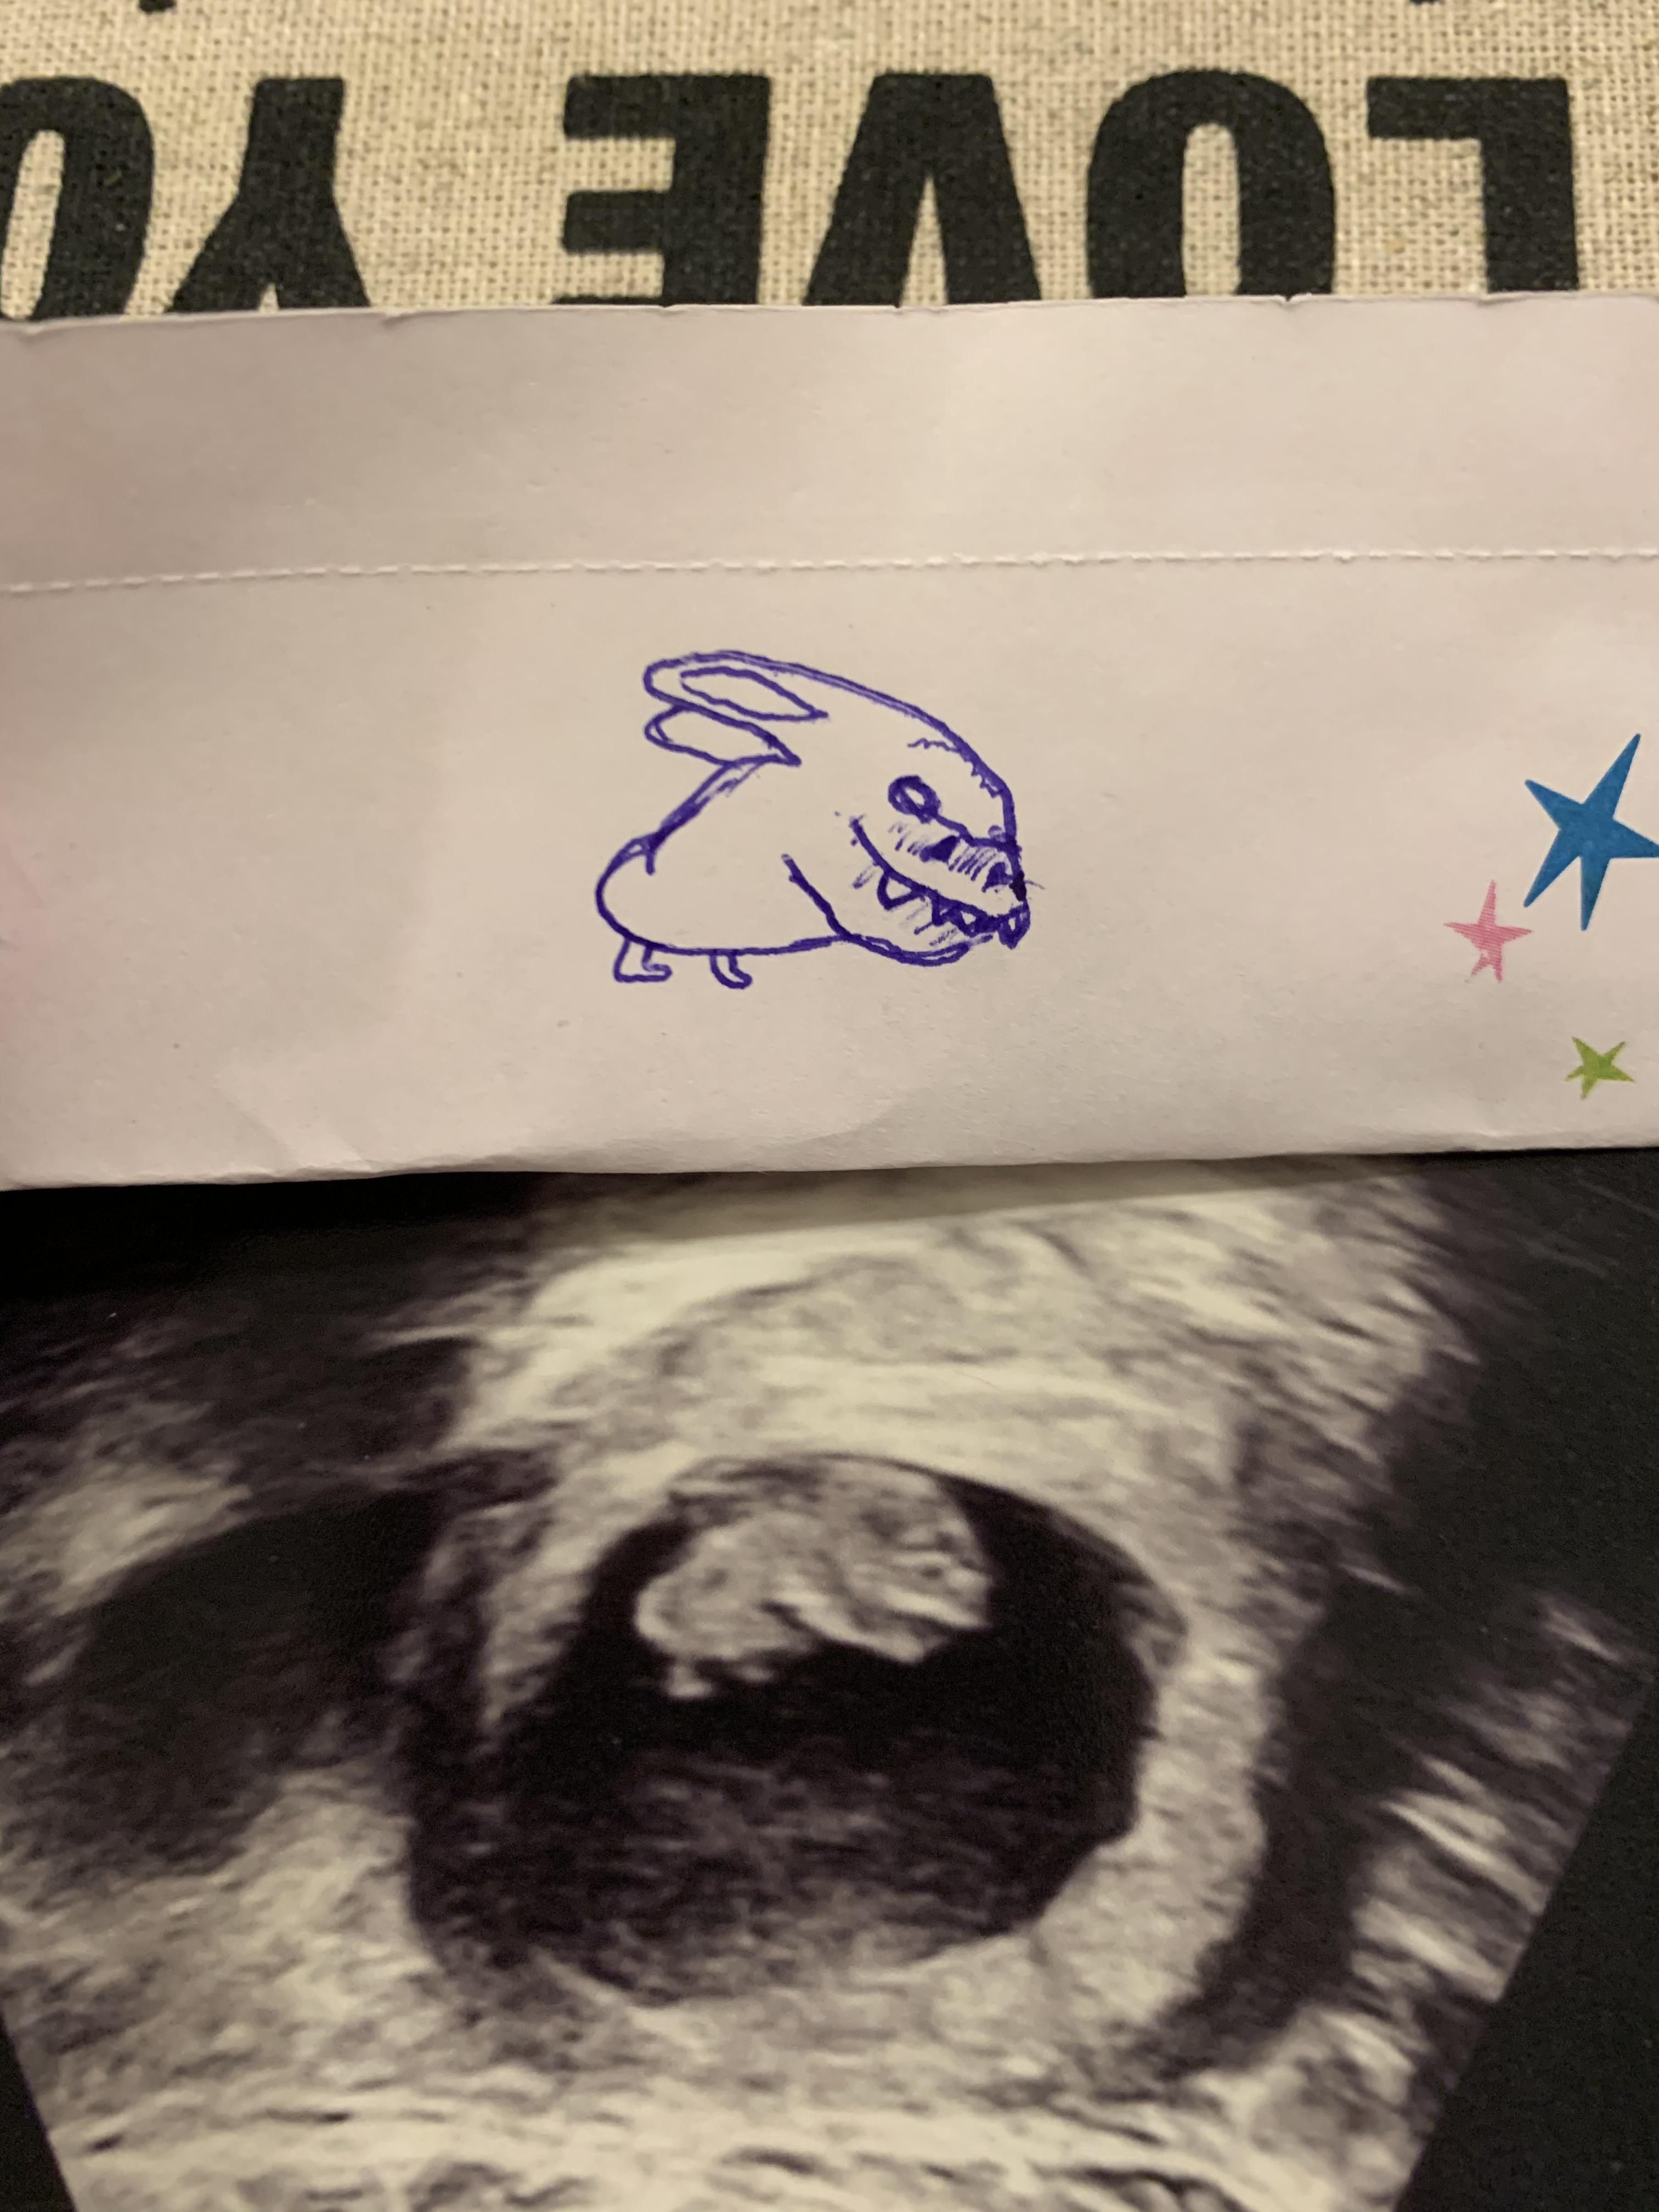 I found out I’m going to be an uncle!!! My sister wasn’t too happy about my interpretation of her upside down ultrasound.